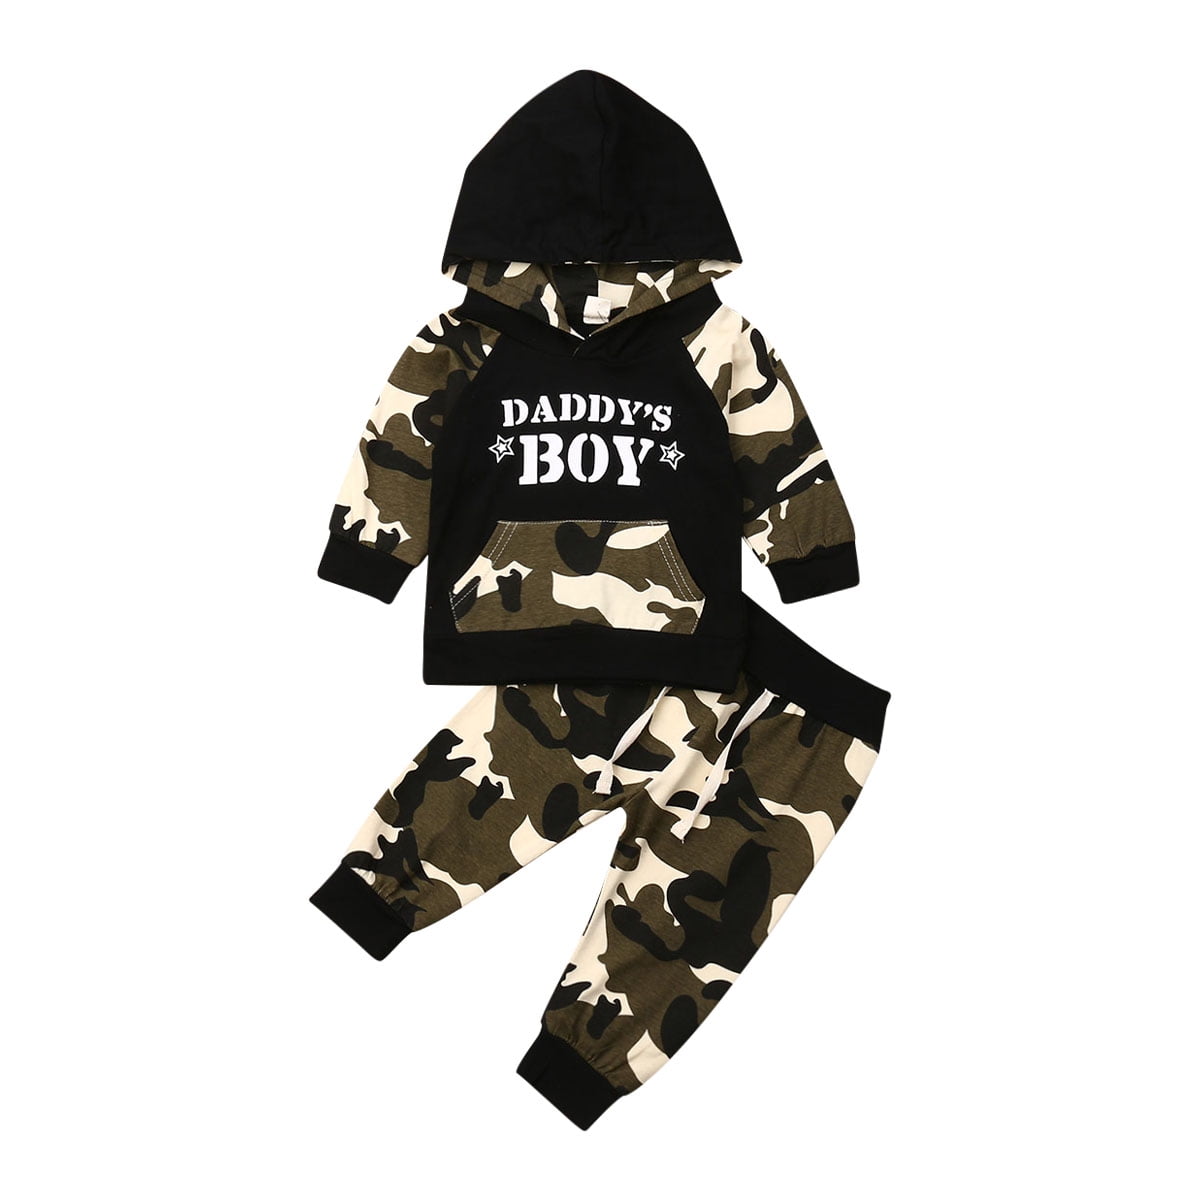 2PCS Baby Boys "DADDY'S BOY" Hooded Tops Pant Outfits Toddler Kid Camouflage Set 